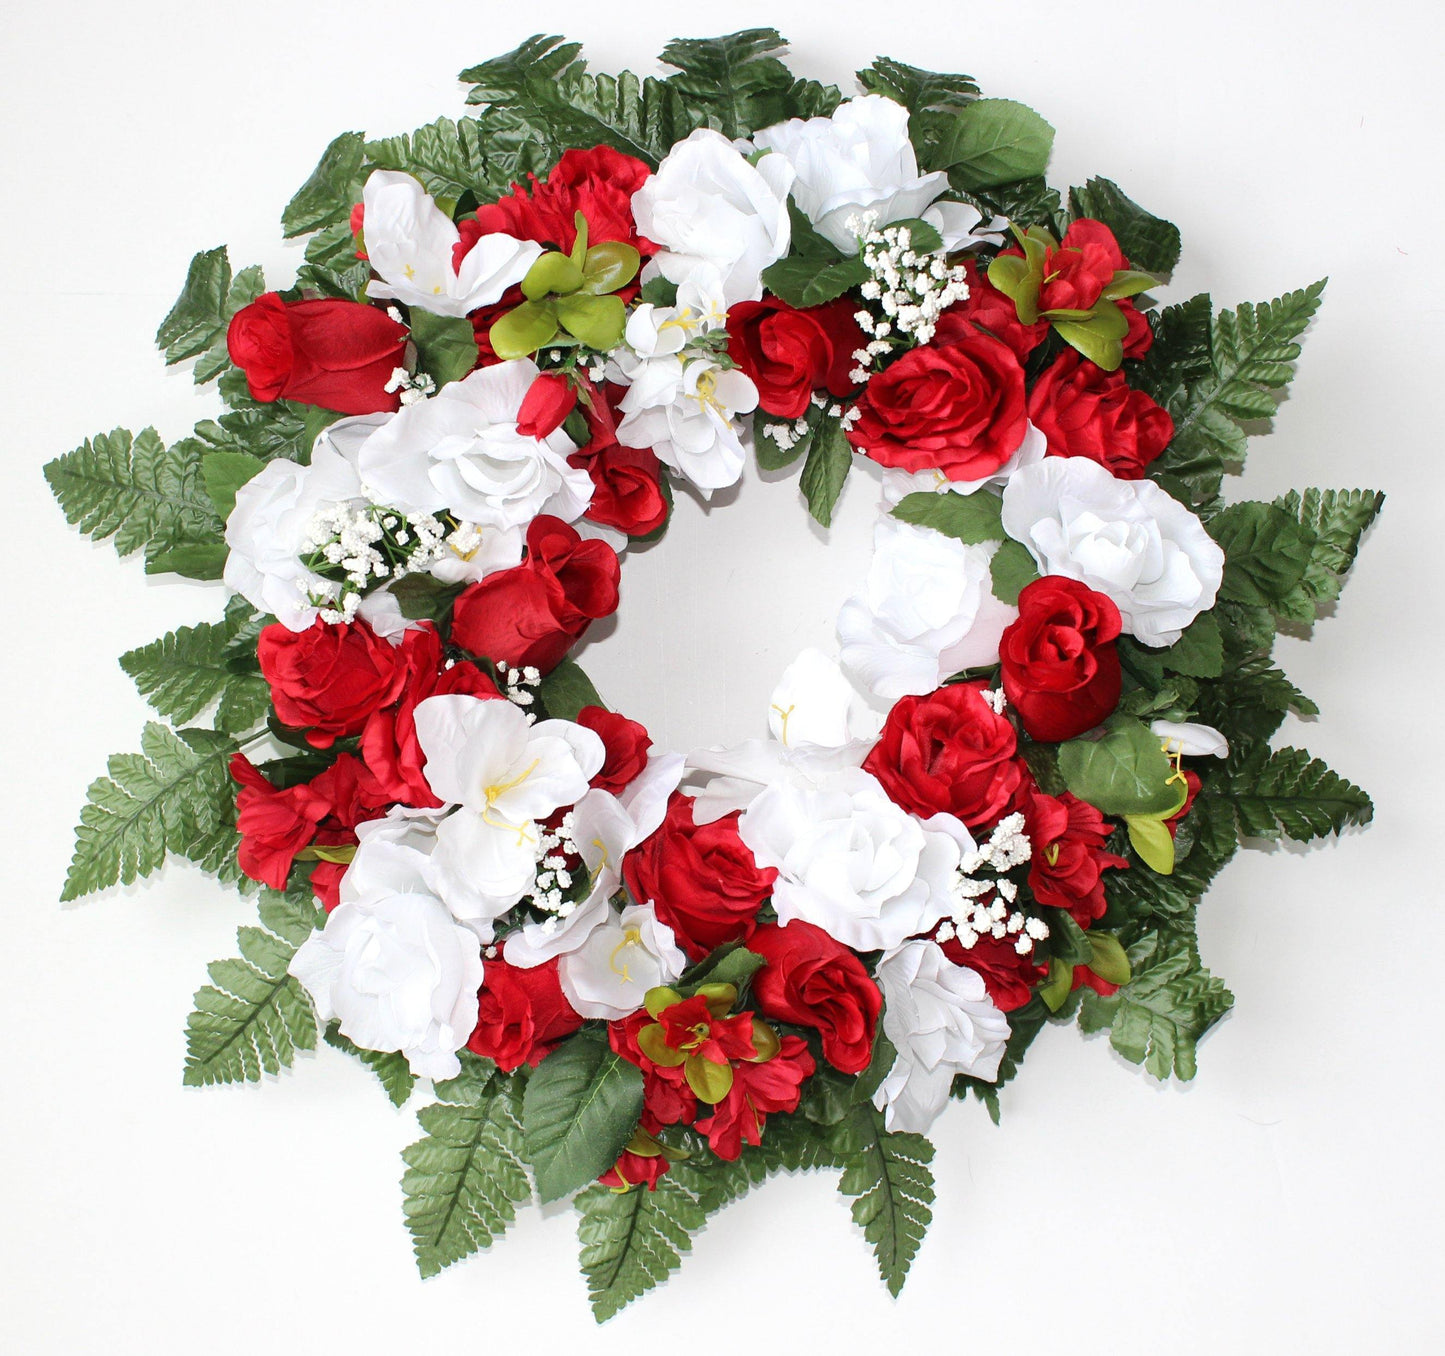 Premium Exclusive - 18 inch Wreath with Red and White Roses